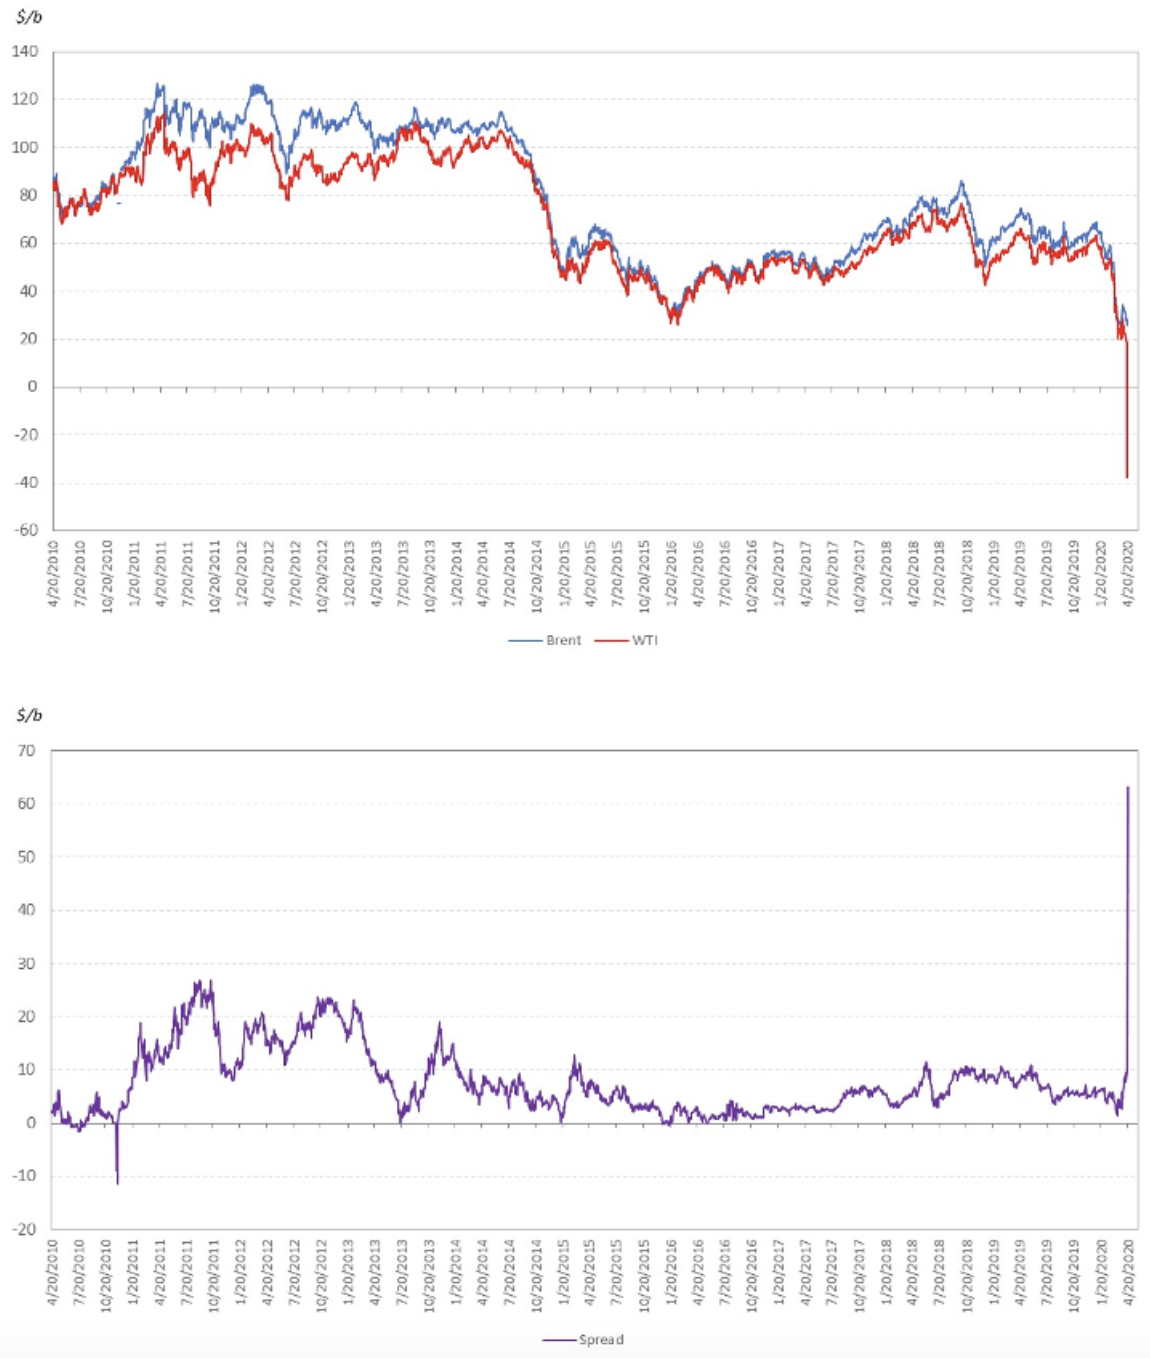 These graphs compare daily prompt contract prices for WTI and Brent over a decade.